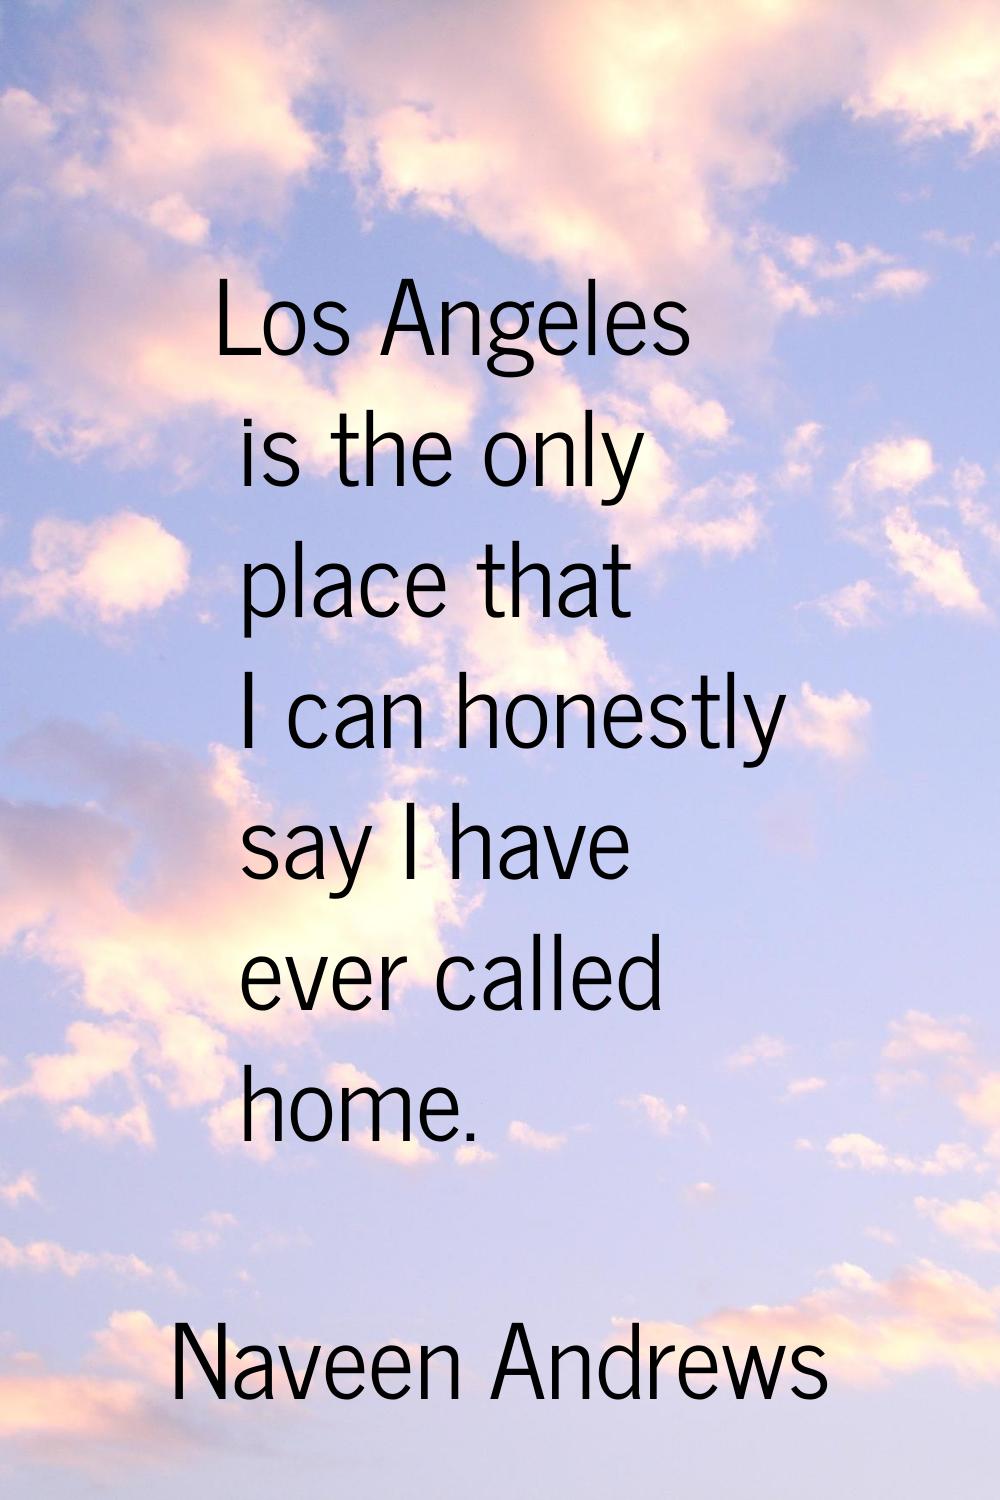 Los Angeles is the only place that I can honestly say I have ever called home.